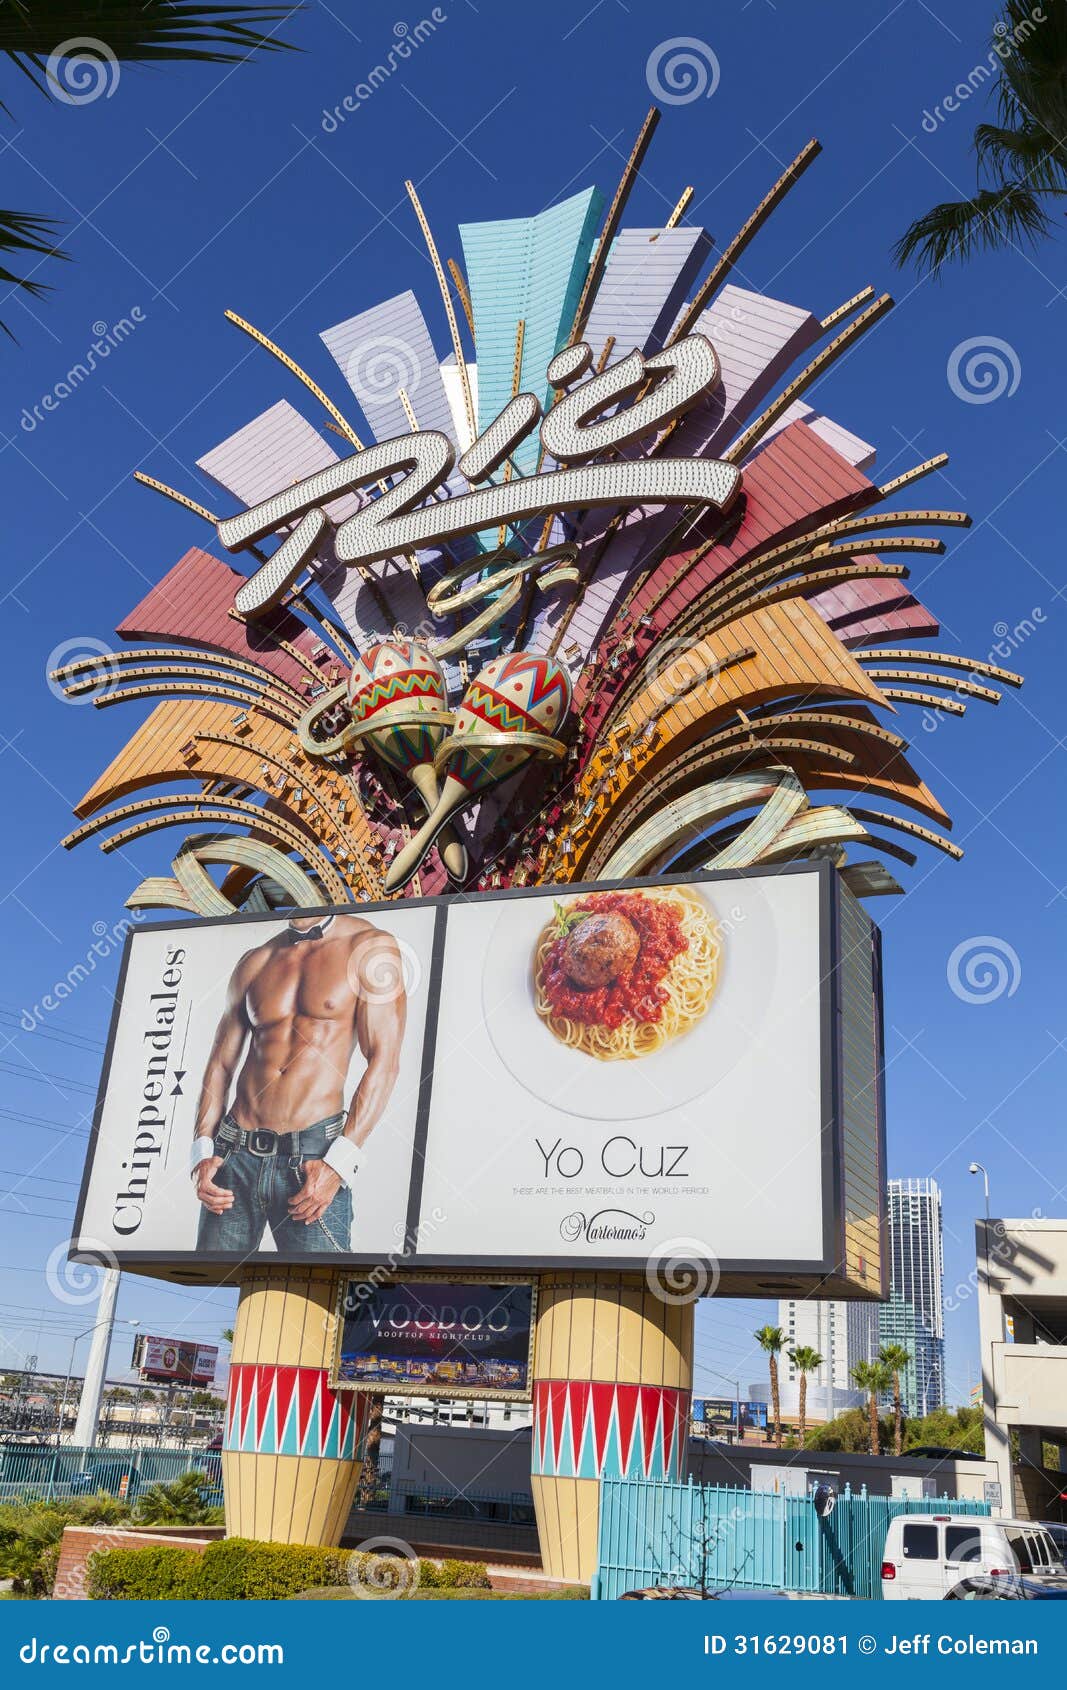 The Rio Hotel Sign In Las Vegas, NV On June 14, 2013 Editorial Photo - Image: 31629081